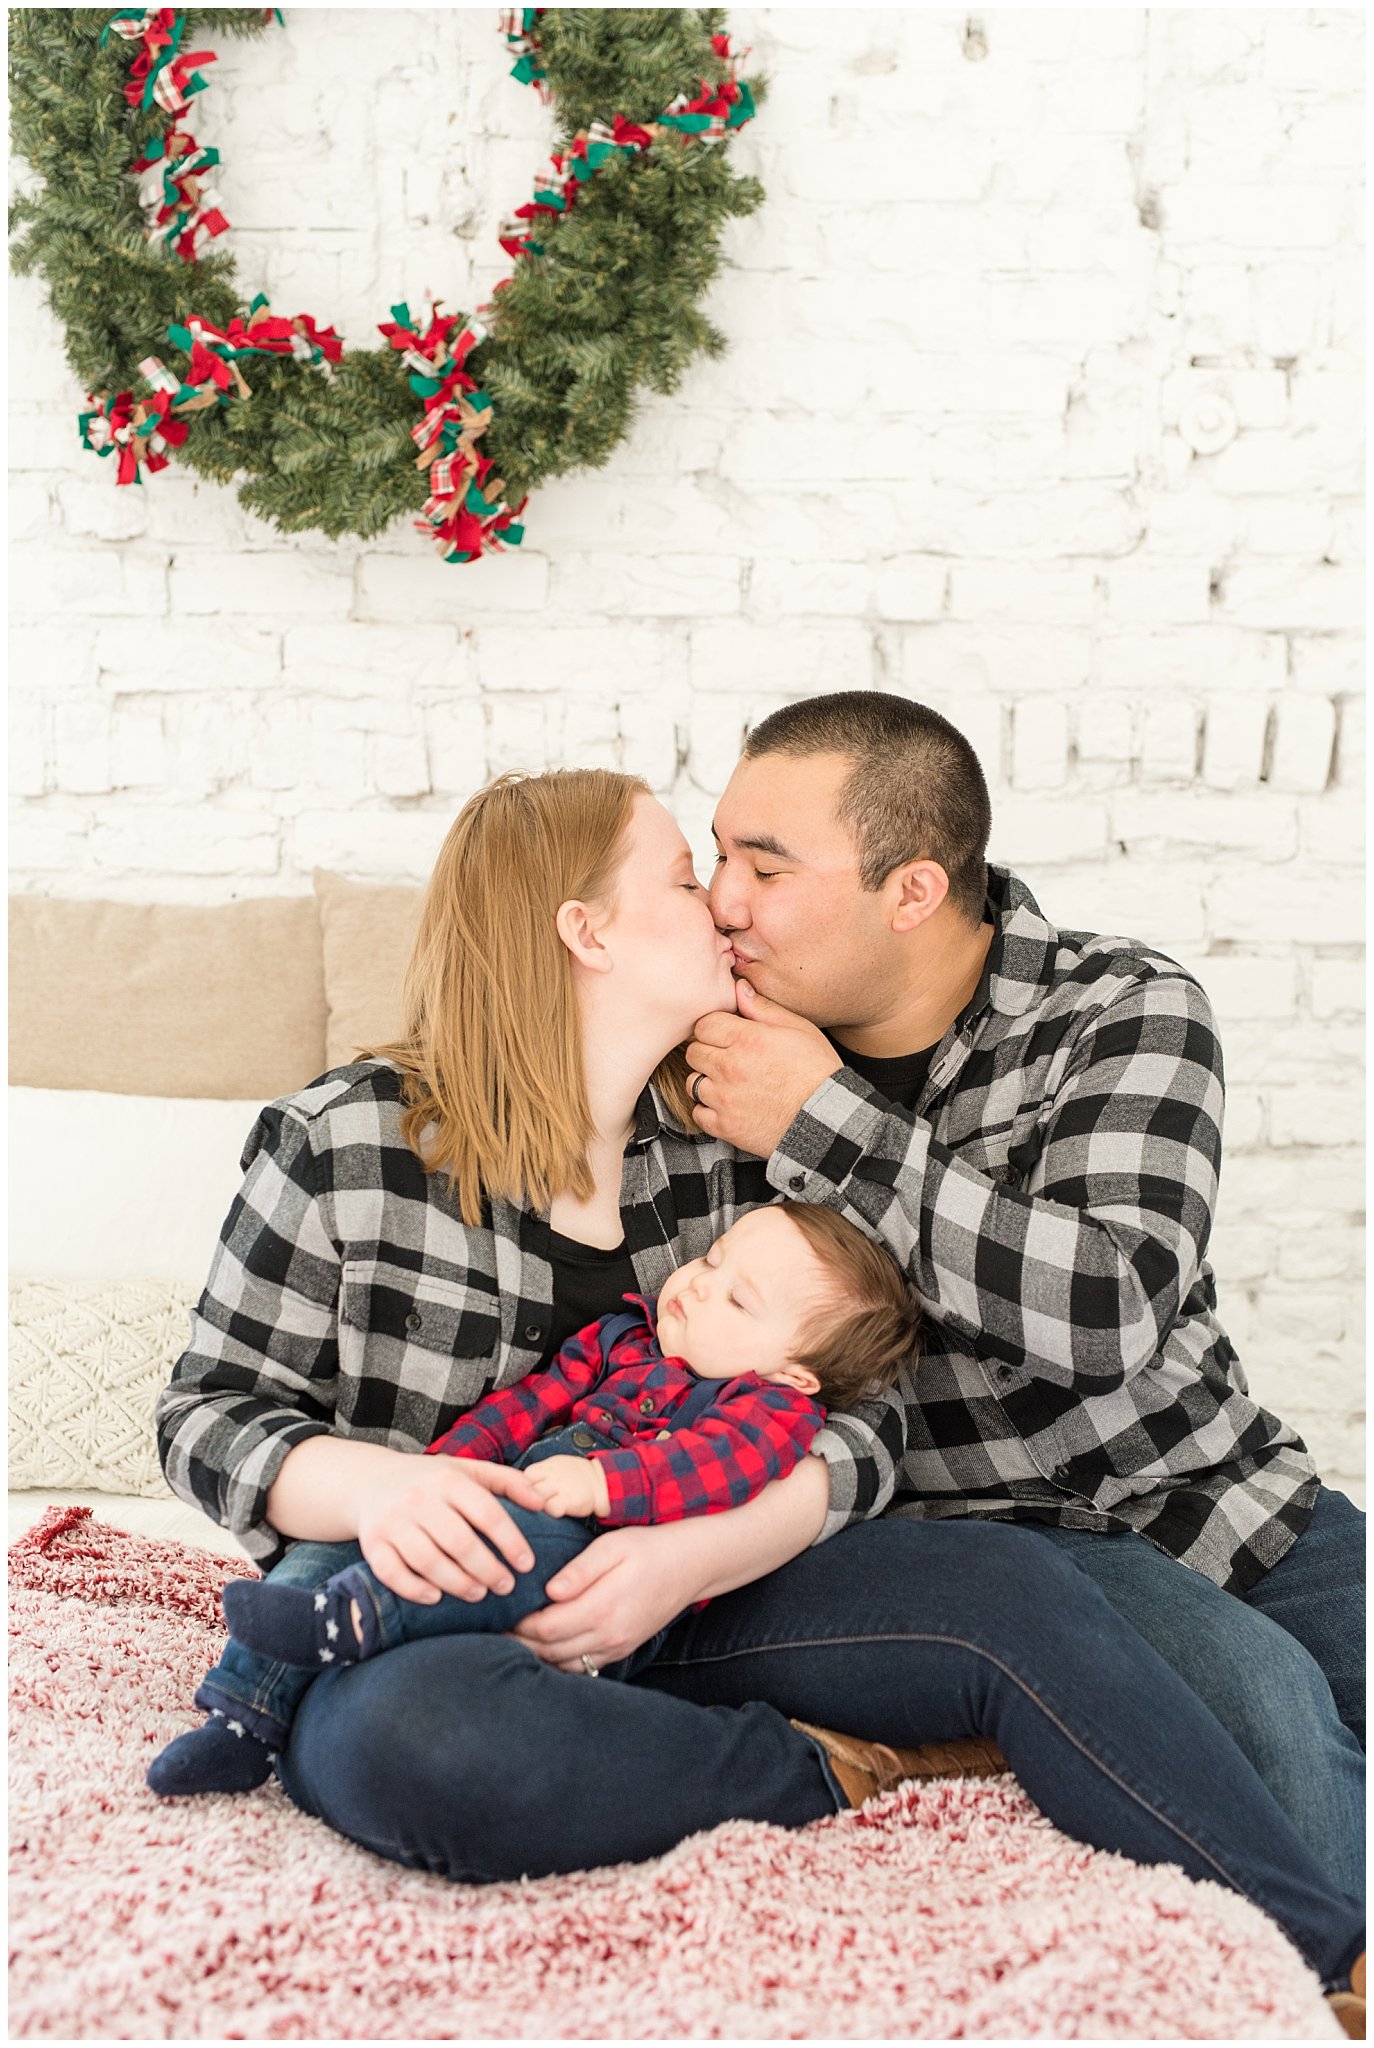 Parents kiss as baby boy sleeps in arms with wreath behind them on the bed | Family Christmas session at the 5th floor | Utah Photographers | Jessie and Dallin Photography